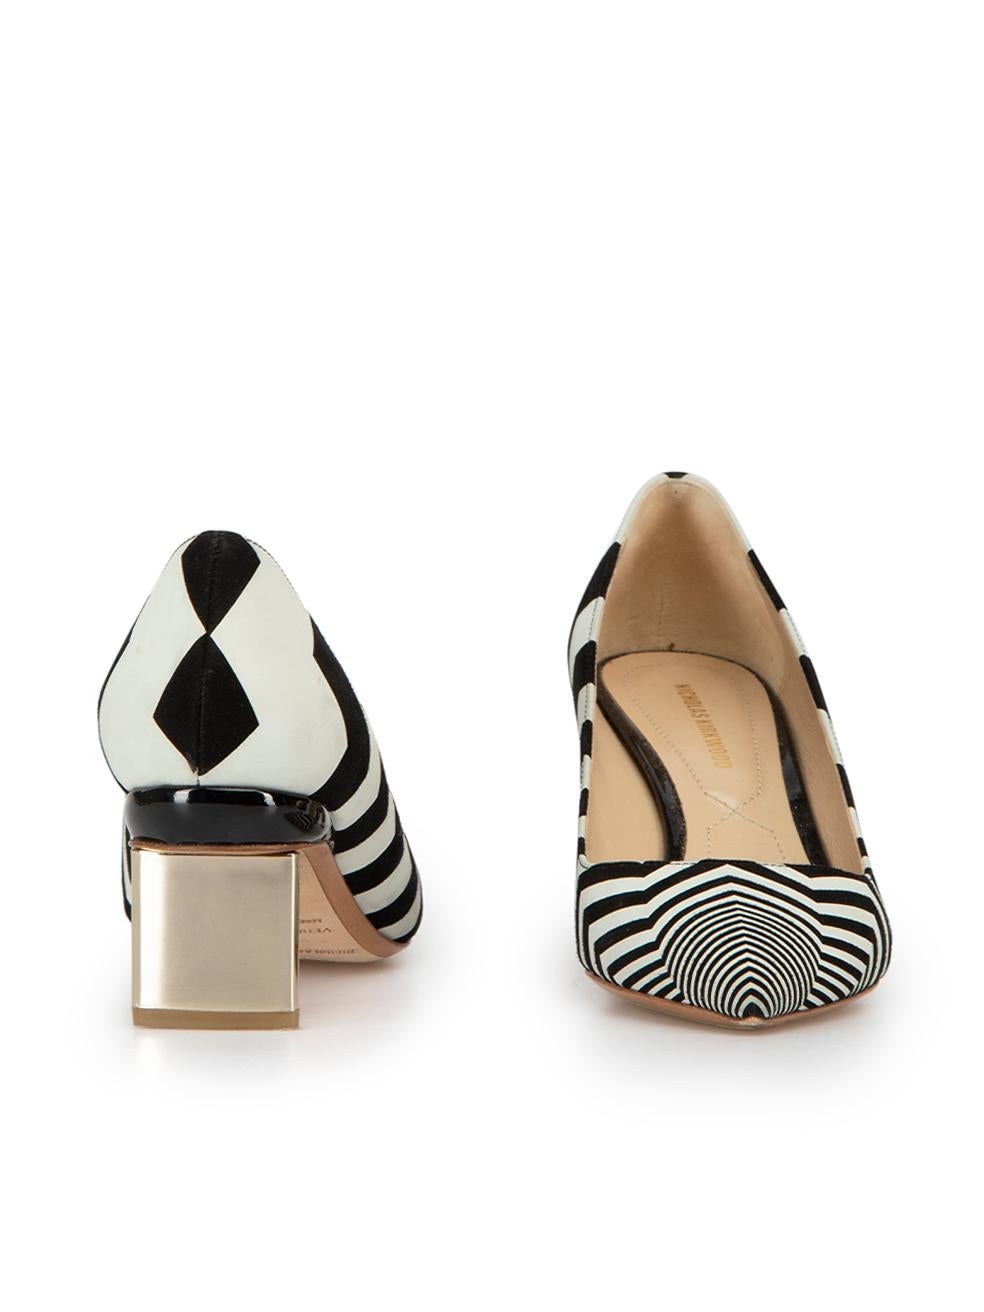 striped shoes heels